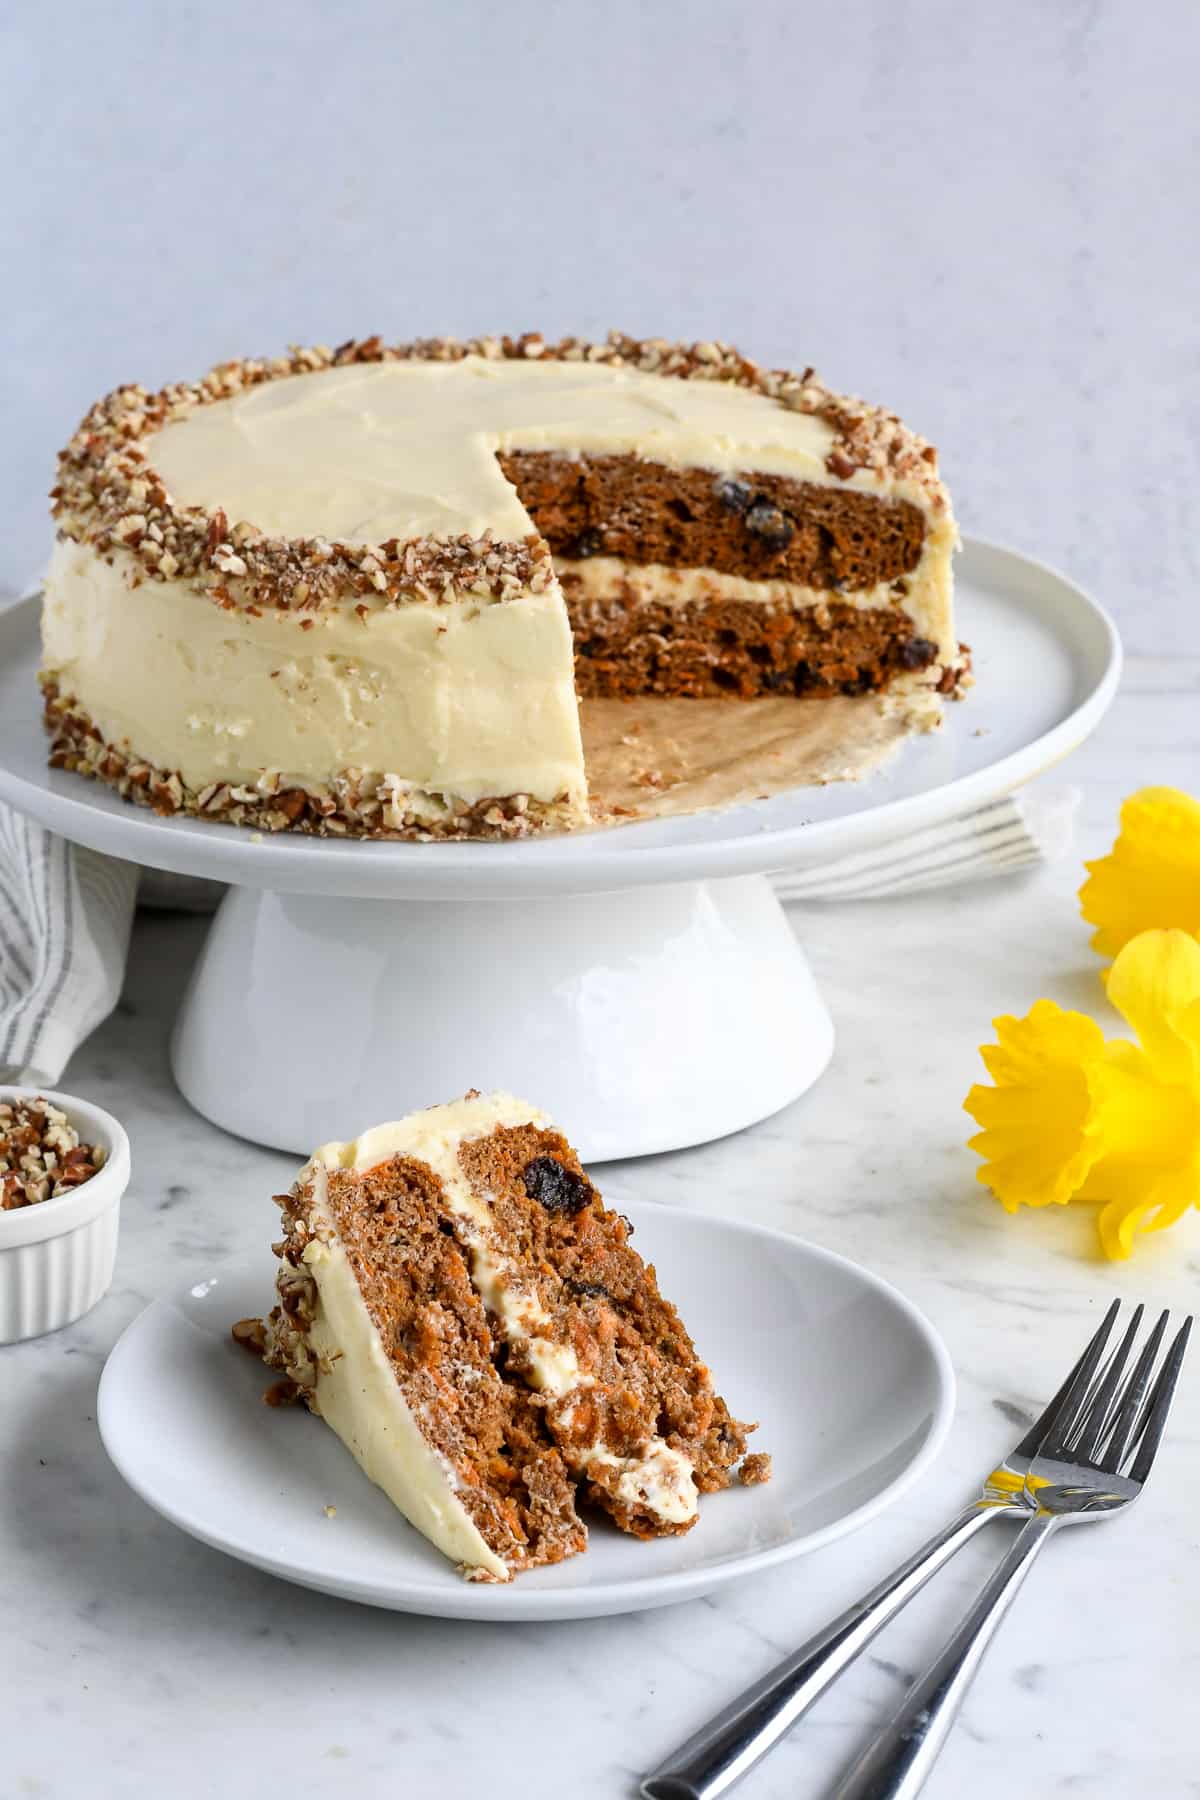 Best Gluten Free Carrot Cake whole cake with slice on plate